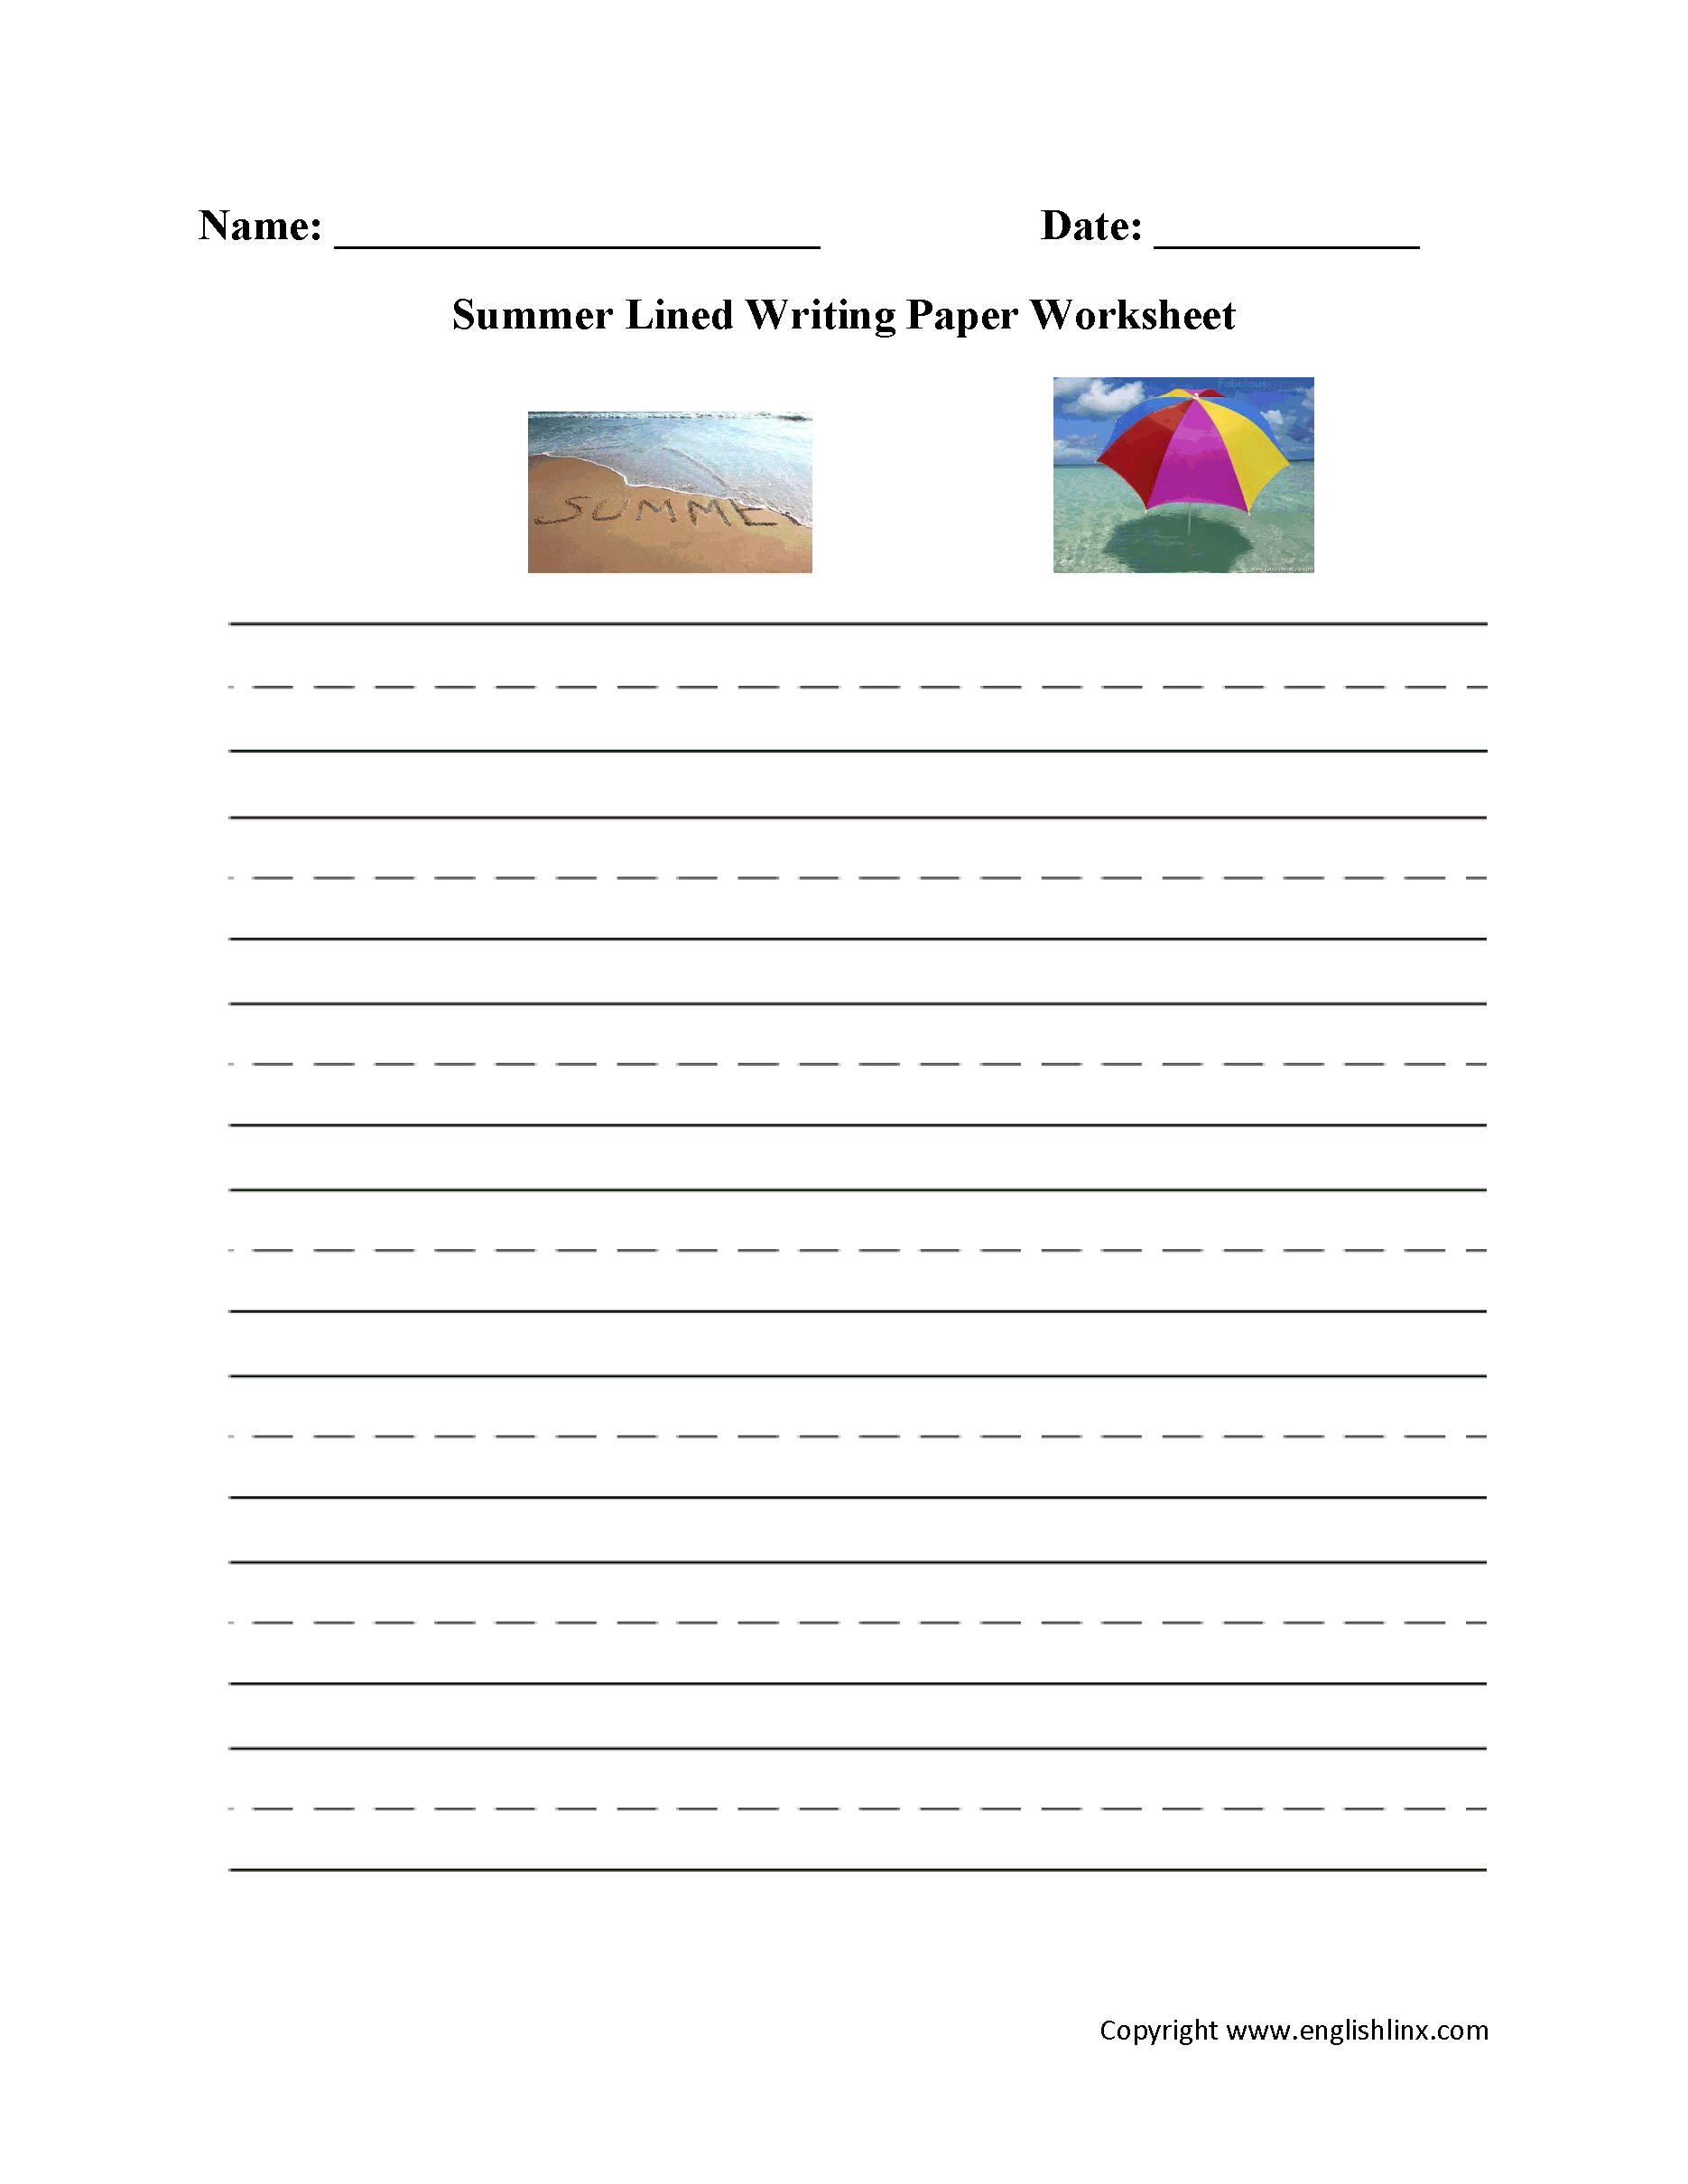 Summer Lined Writing Paper Worksheet